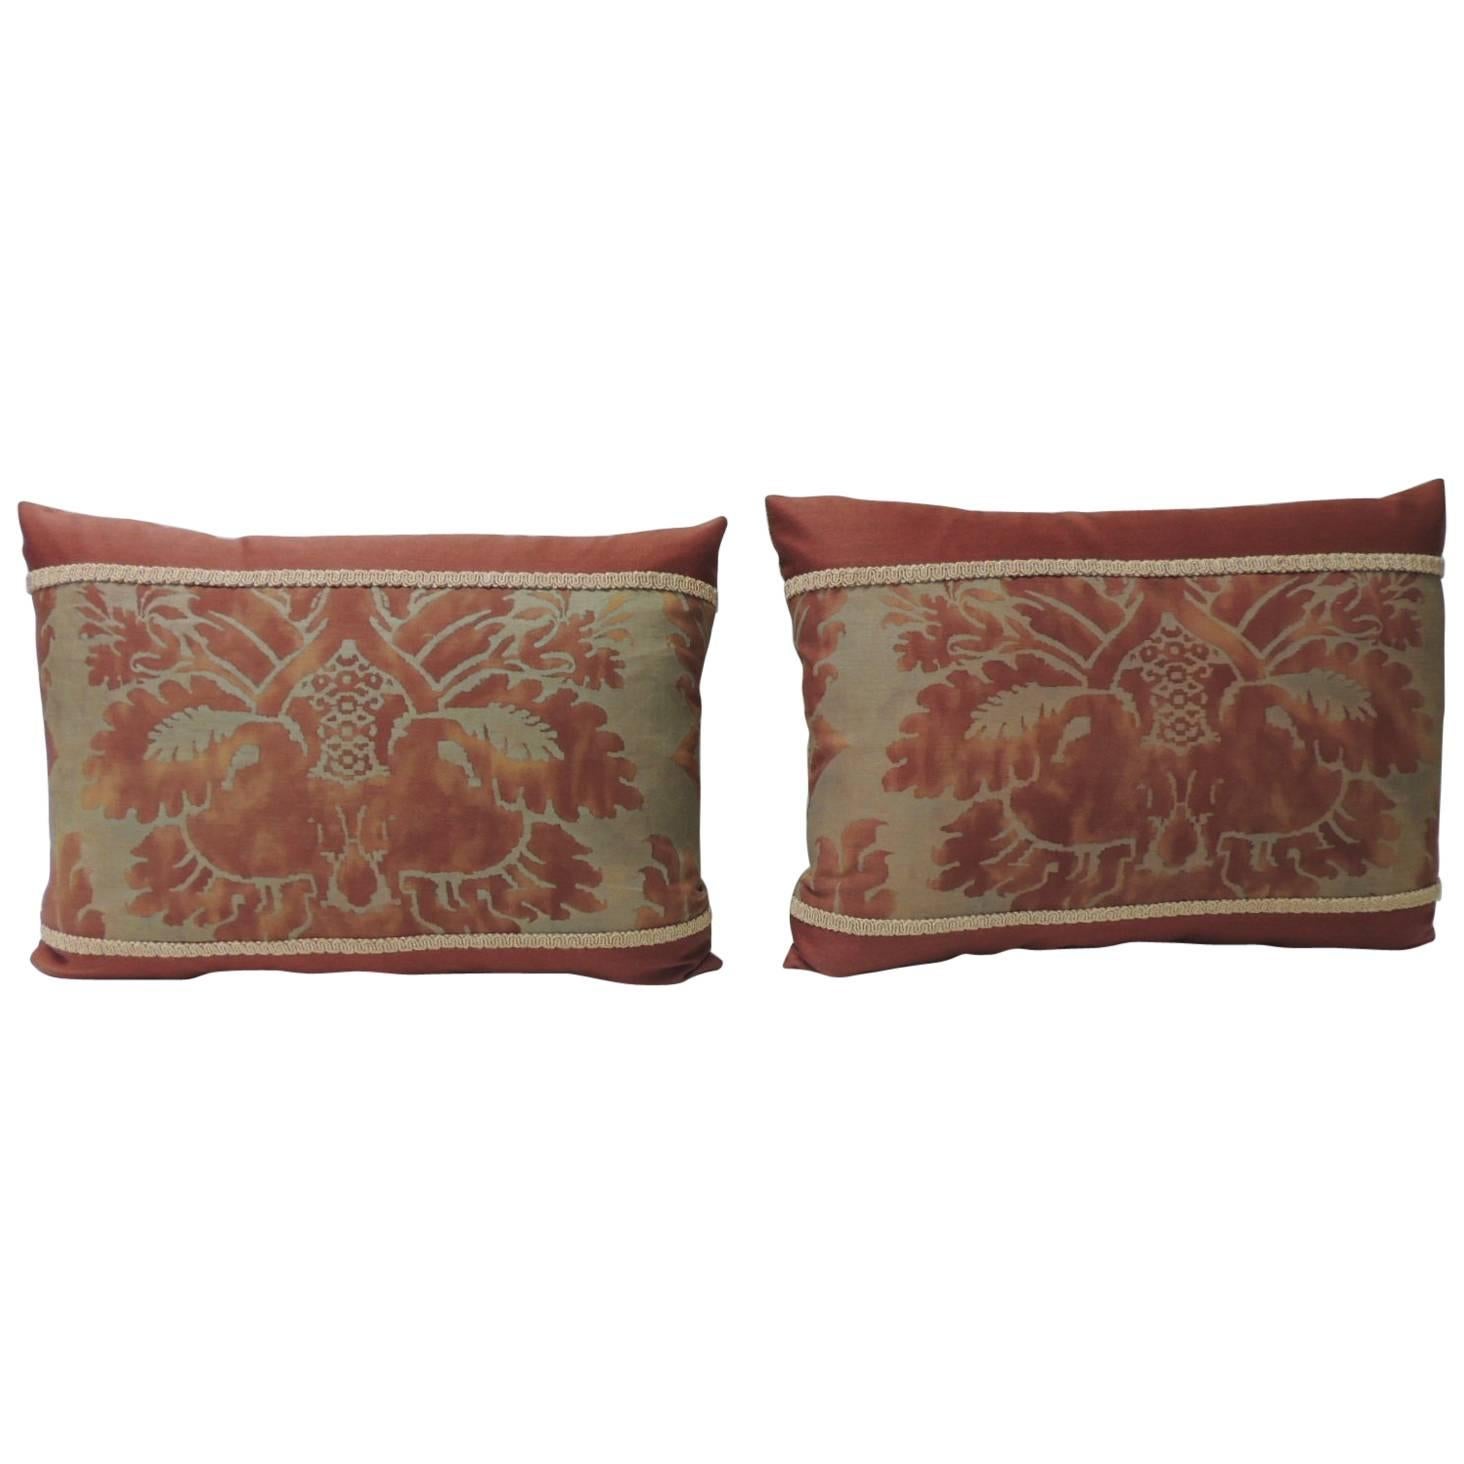 Pair of Vintage Fortuny “Glicine” Red and Silvery Bolster Decorative Pillows